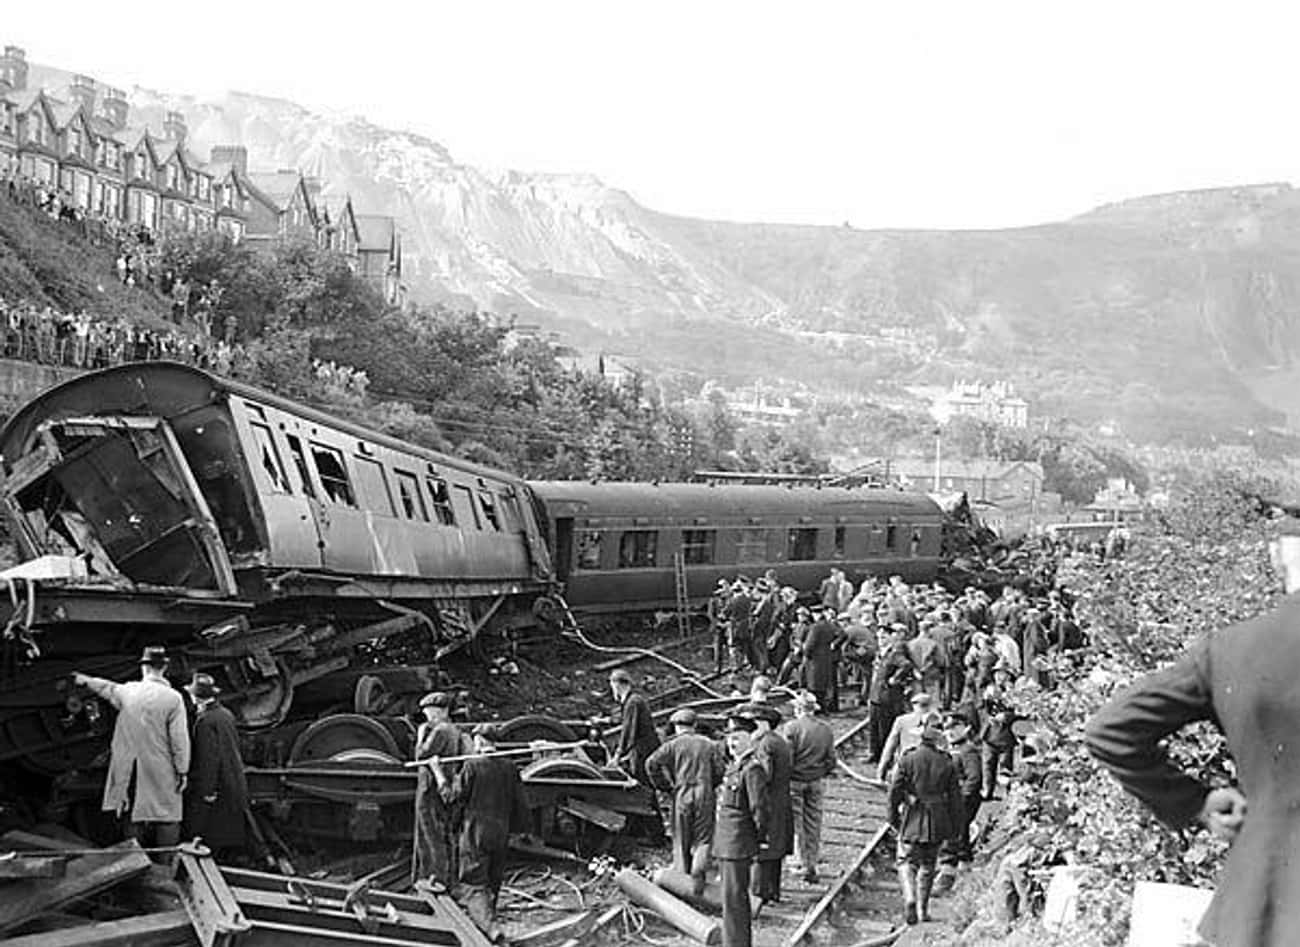 Frane Selak Survived A Train Crash In 1962 Only To Endure Six Additional Plane, Car, And Bus Crashes In His Life